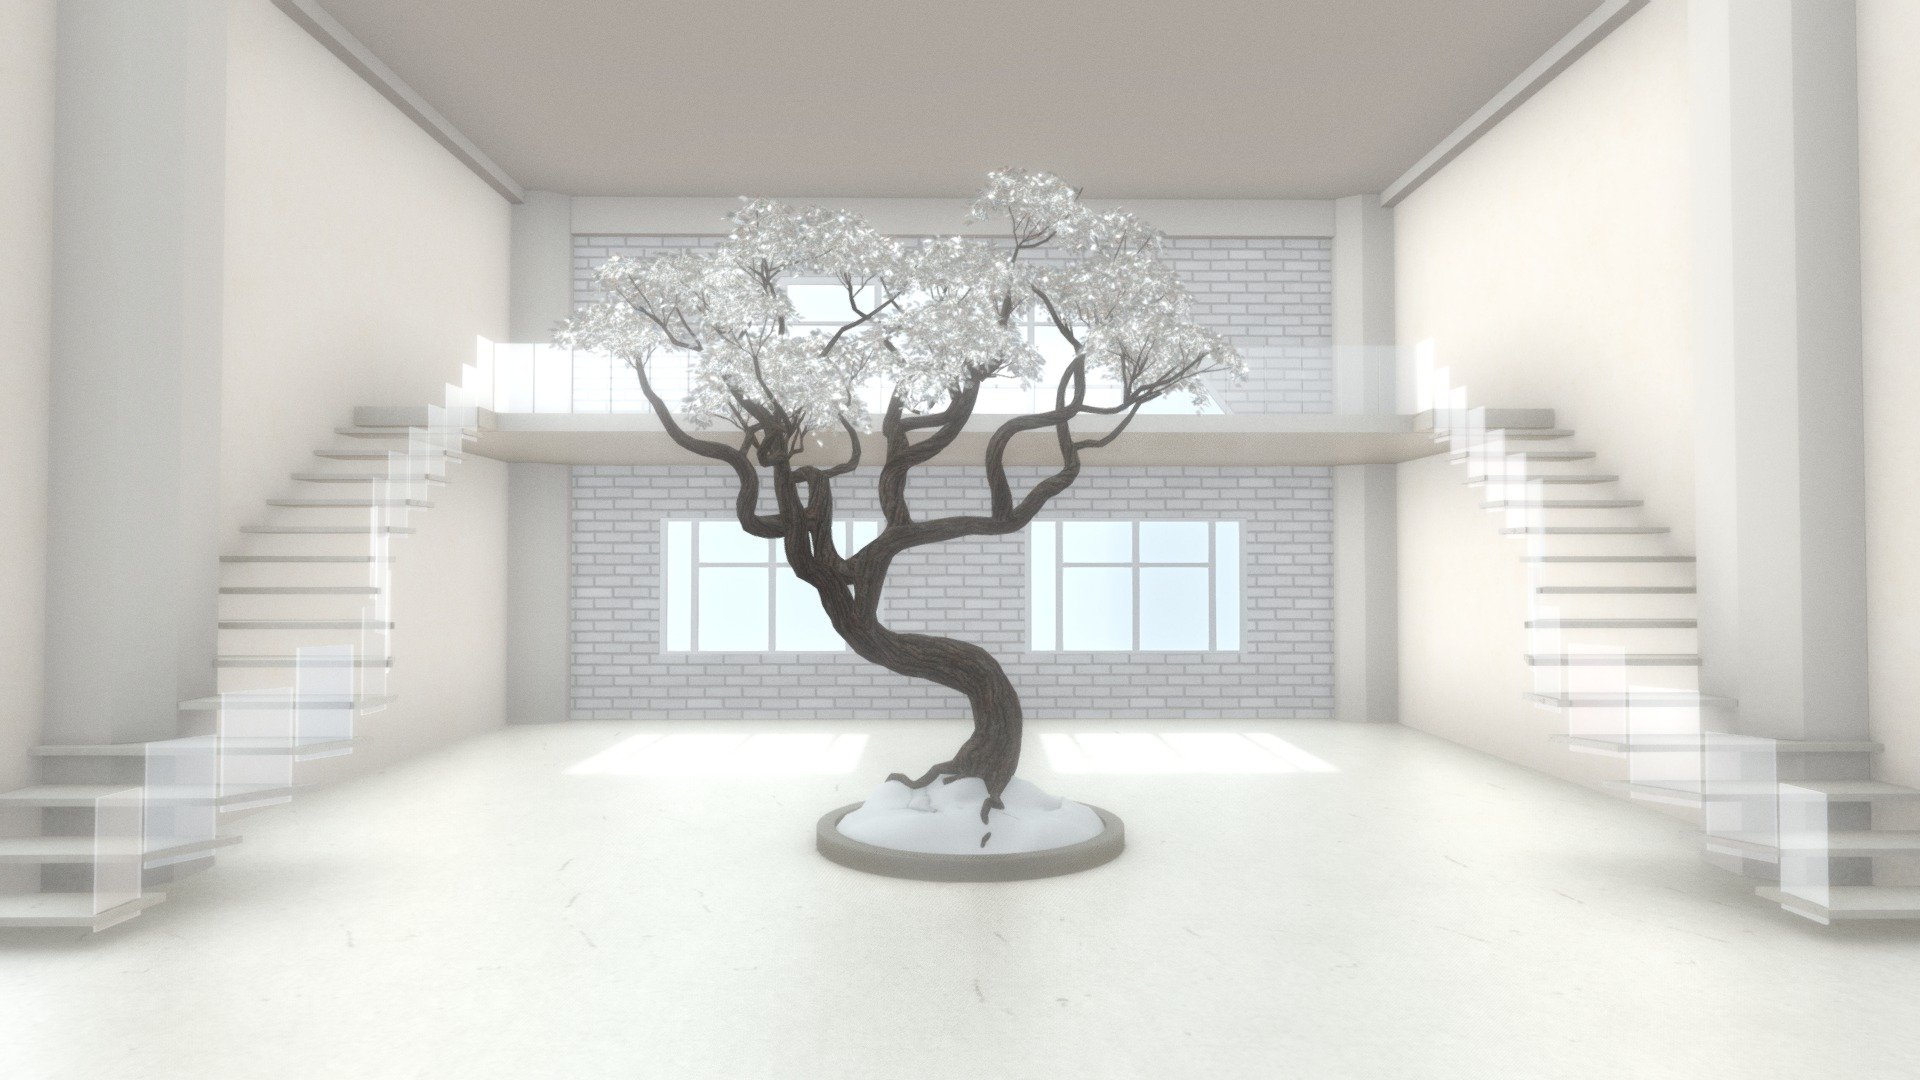 Staircase Art Gallery, scene has got baked in lighting.
Ambient Occlusion and Lighting with Blender.
Original files are available.
FBX file size : 4.32KB

Click on the link to see more models : https://sketchfab.com/GbehnamG/store

If you need customized 3d models , feel free to contact at: mr.gbehnamg@yahoo.com - VR Staircase Art Gallery Nov. 2020 - Buy Royalty Free 3D model by BehNaM (@GbehnamG) 3d model